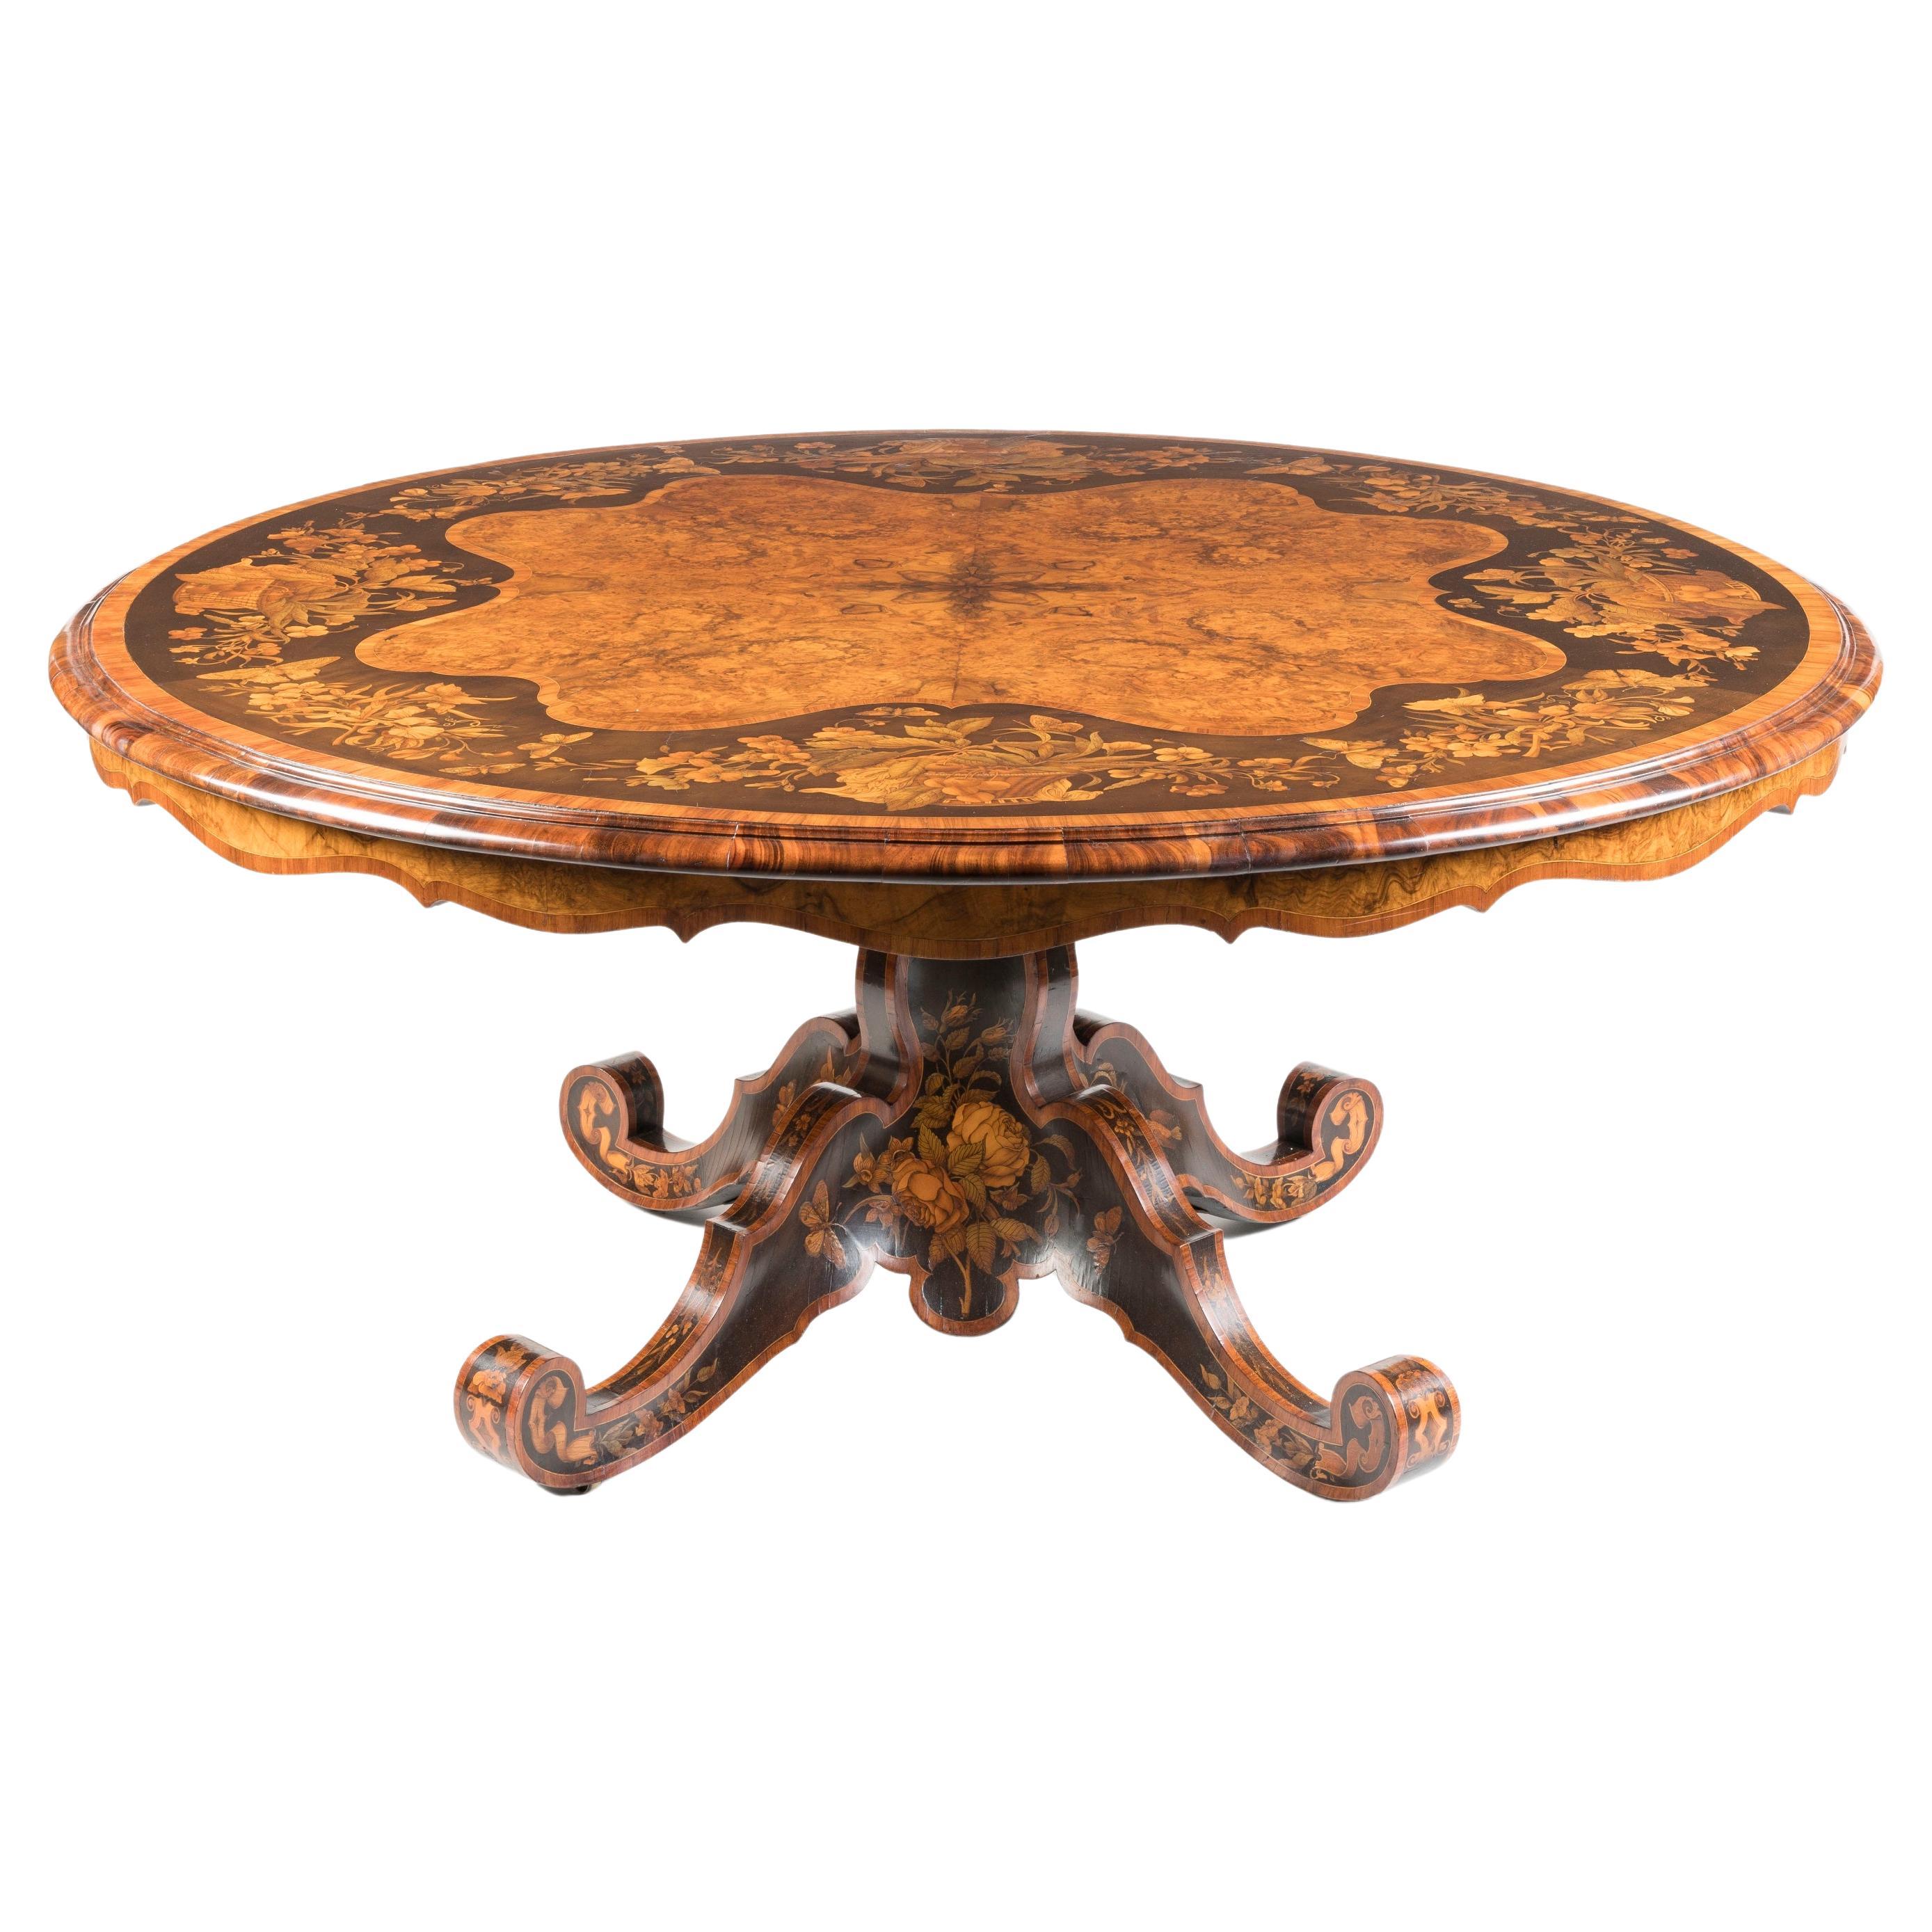 Exquisite 19th Century Burl Walnut and Marquetry Centre Table For Sale